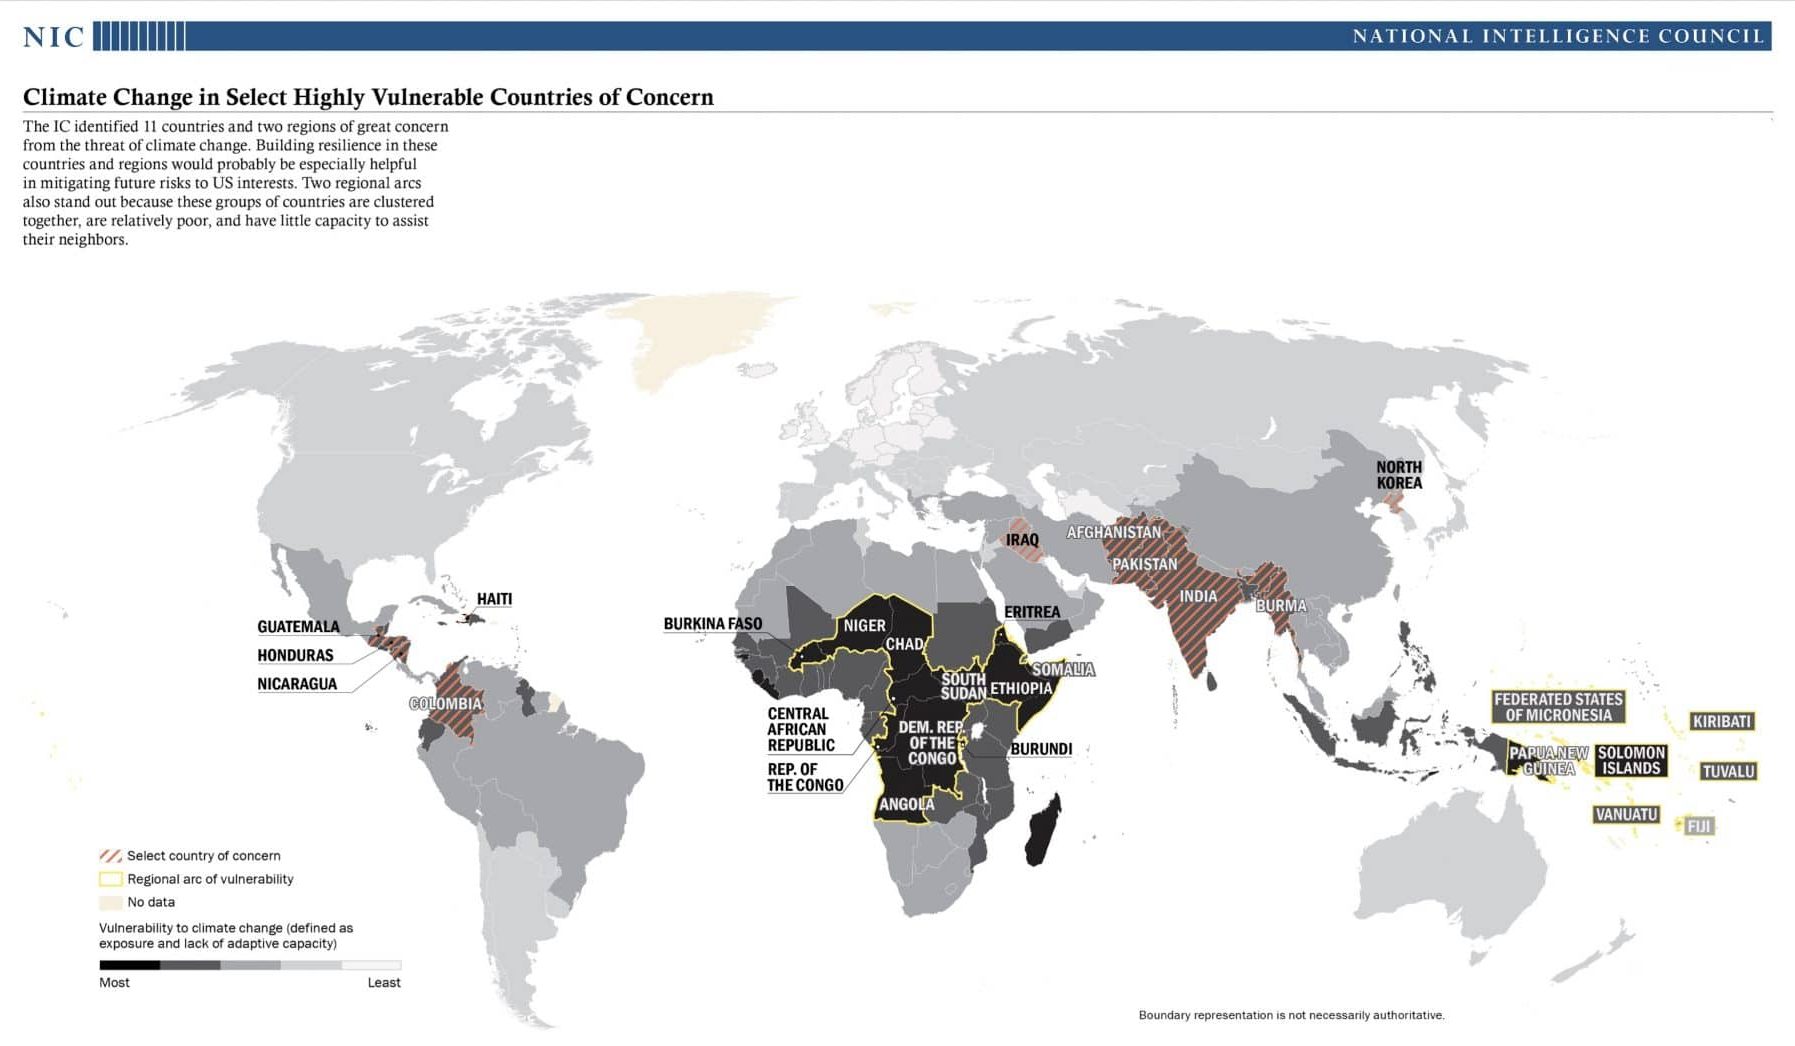 Map of regions and countries of particular concern to US intelligence community